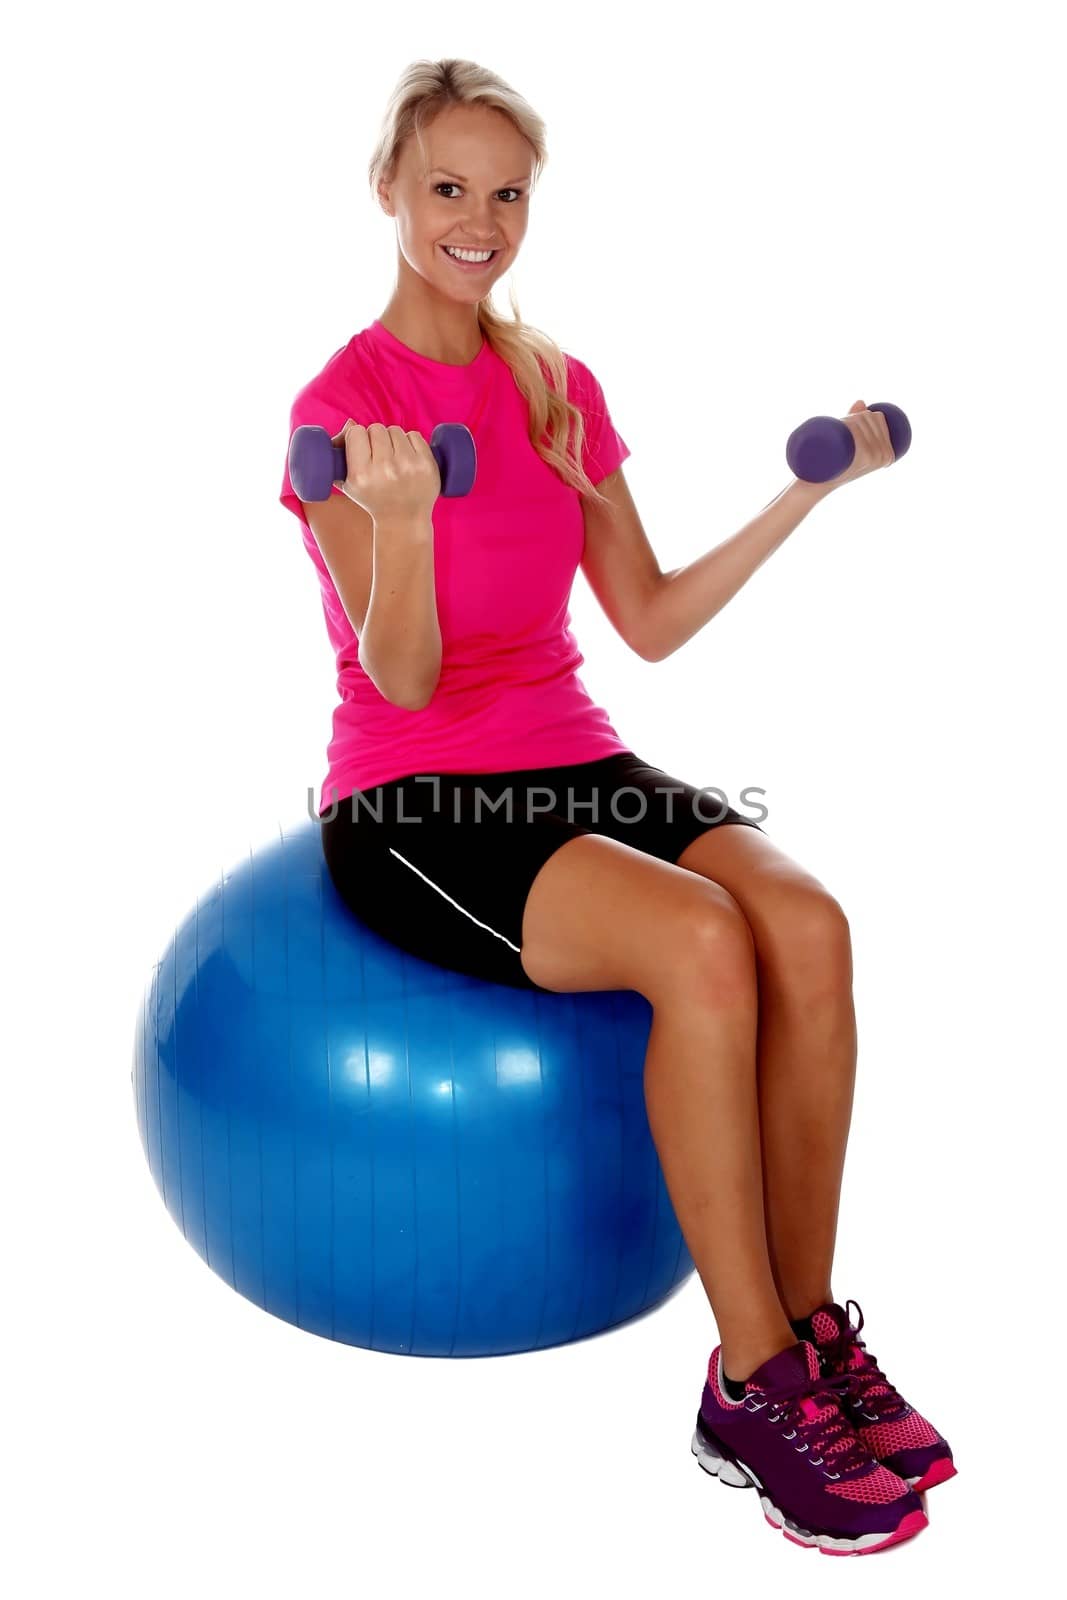 Beautiful woman sitting on exercise ball and lifting weights